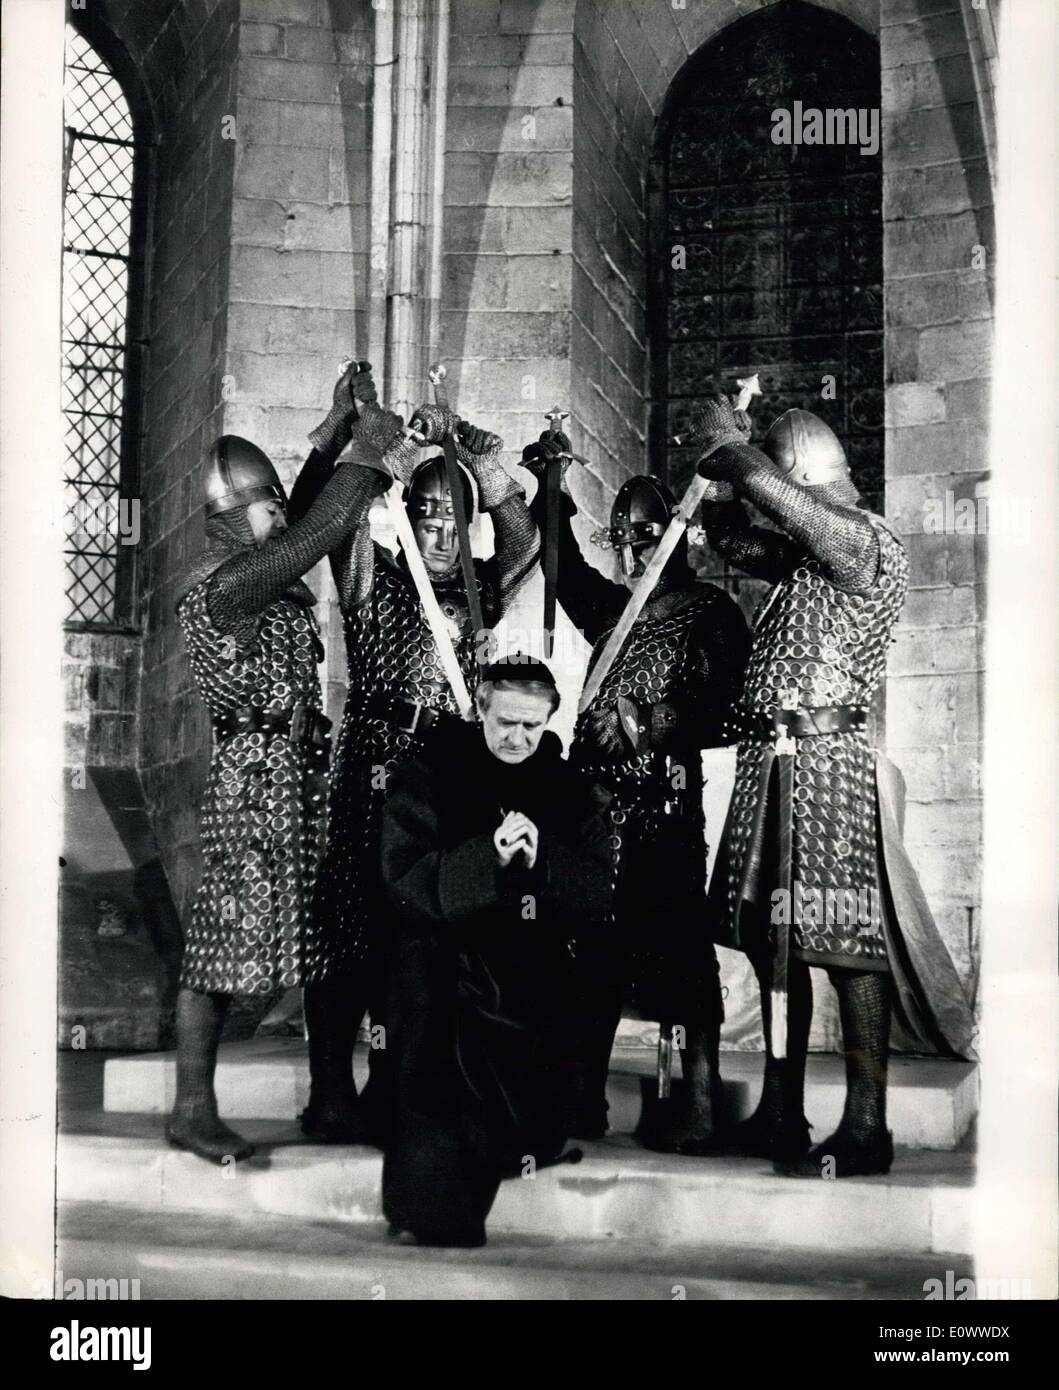 Mar. 16, 1964 - Death to the King's Enemy; On BBC Television on March 25th T.S. Eliot's play ''Murder in the Cathedral'' will be shown. The play which is being acted in Canterbury Cathedral, tells of the murder there in 1170, of Archbishop Thomas A. Becket, who was killed by the Knight's of King Henry II to and the bitter struggle between the two over the powers of church and state. Photo Shows Rehearsing the famous death scene for ''Murder in the Cathedral'' Thomas A Stock Photo